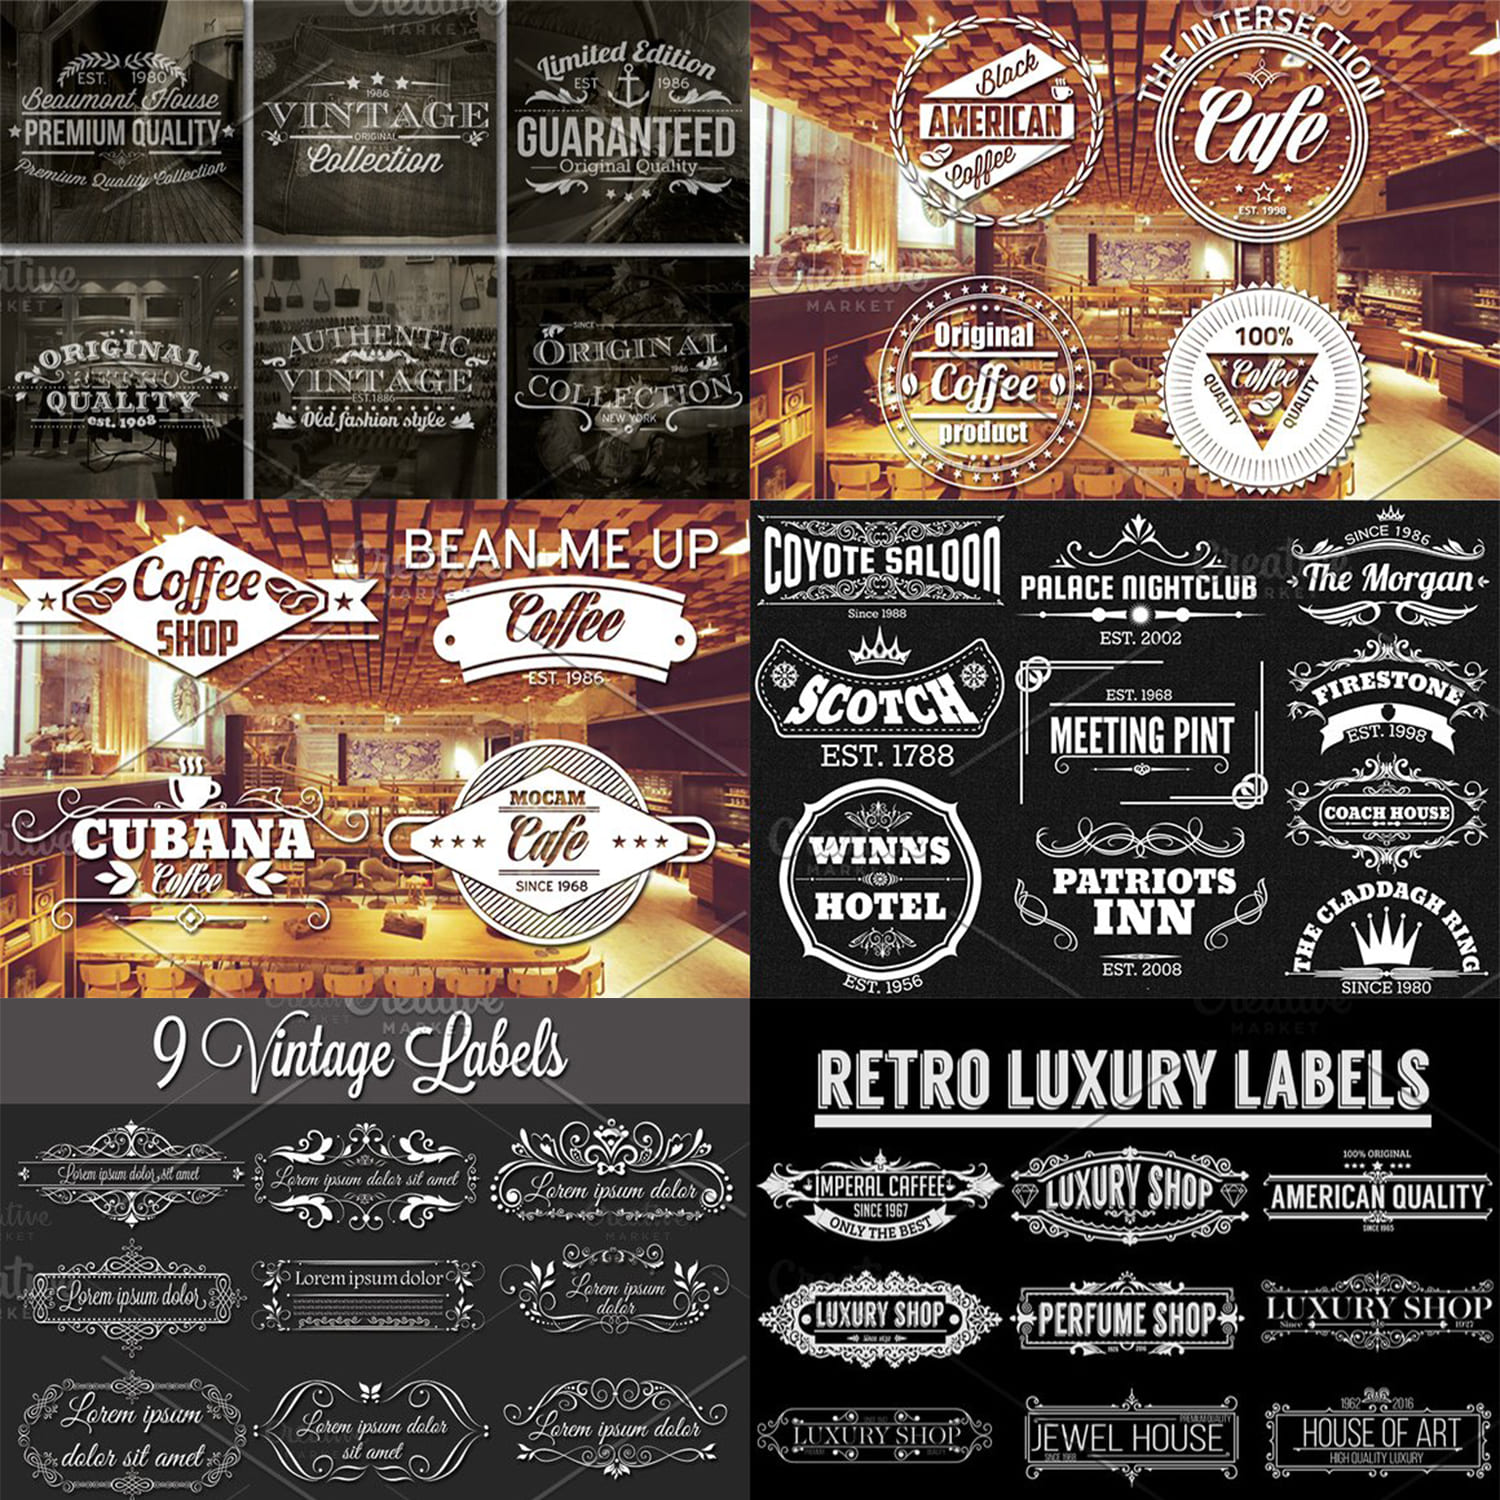 220 Retro Badges and Labels Bundle cover image.